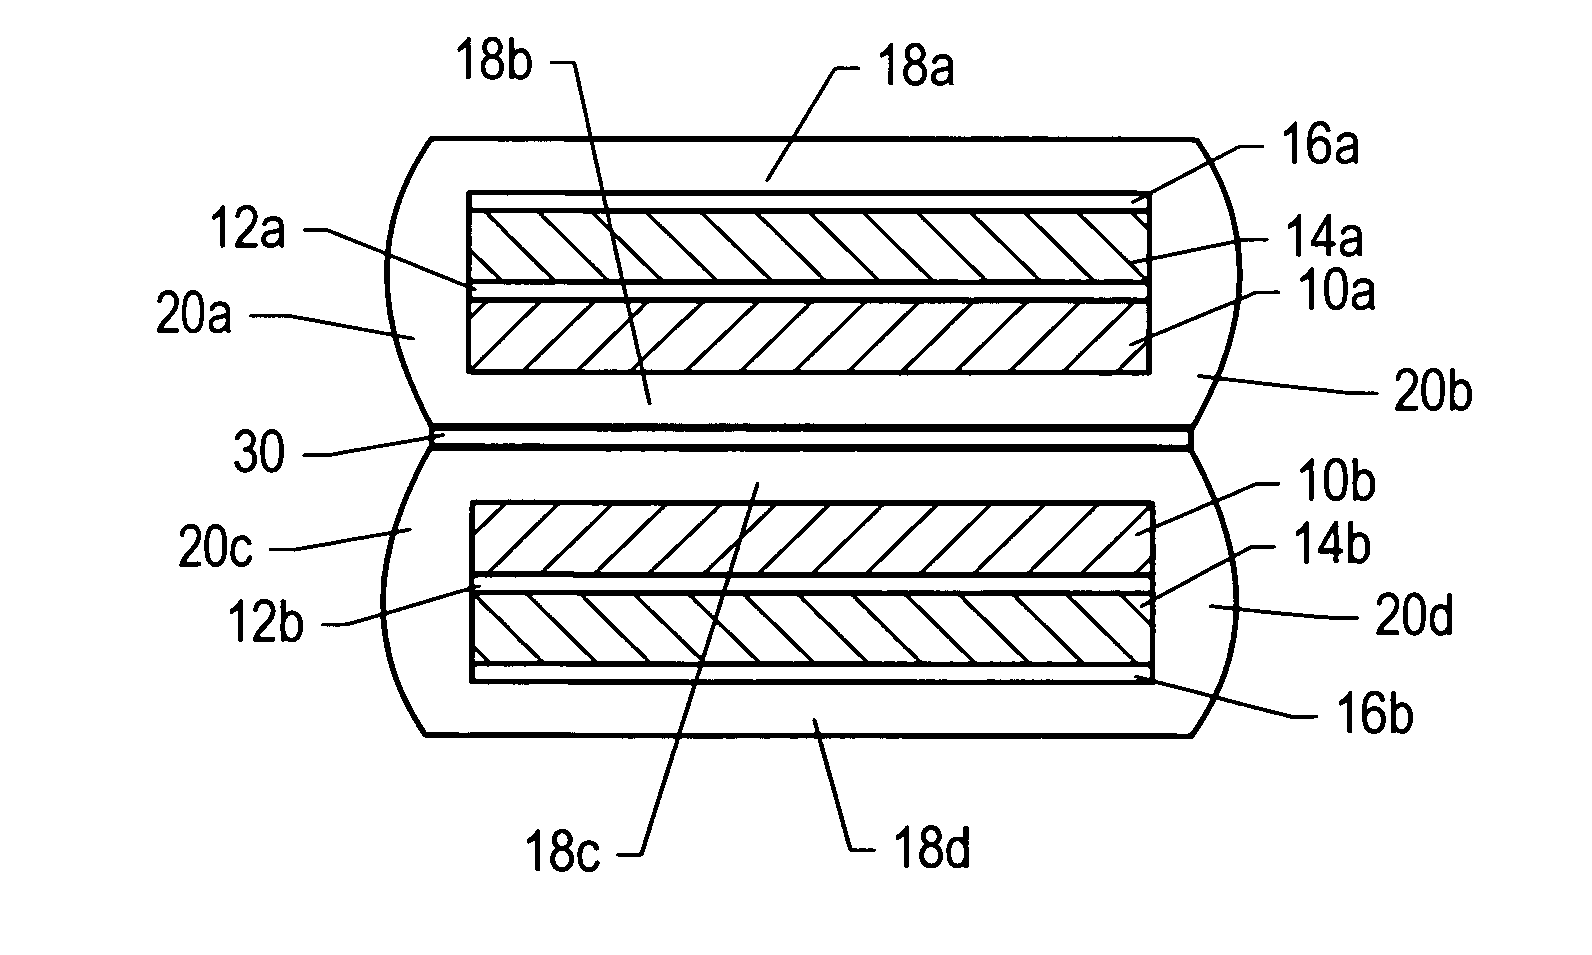 Superconducting articles having dual sided structures